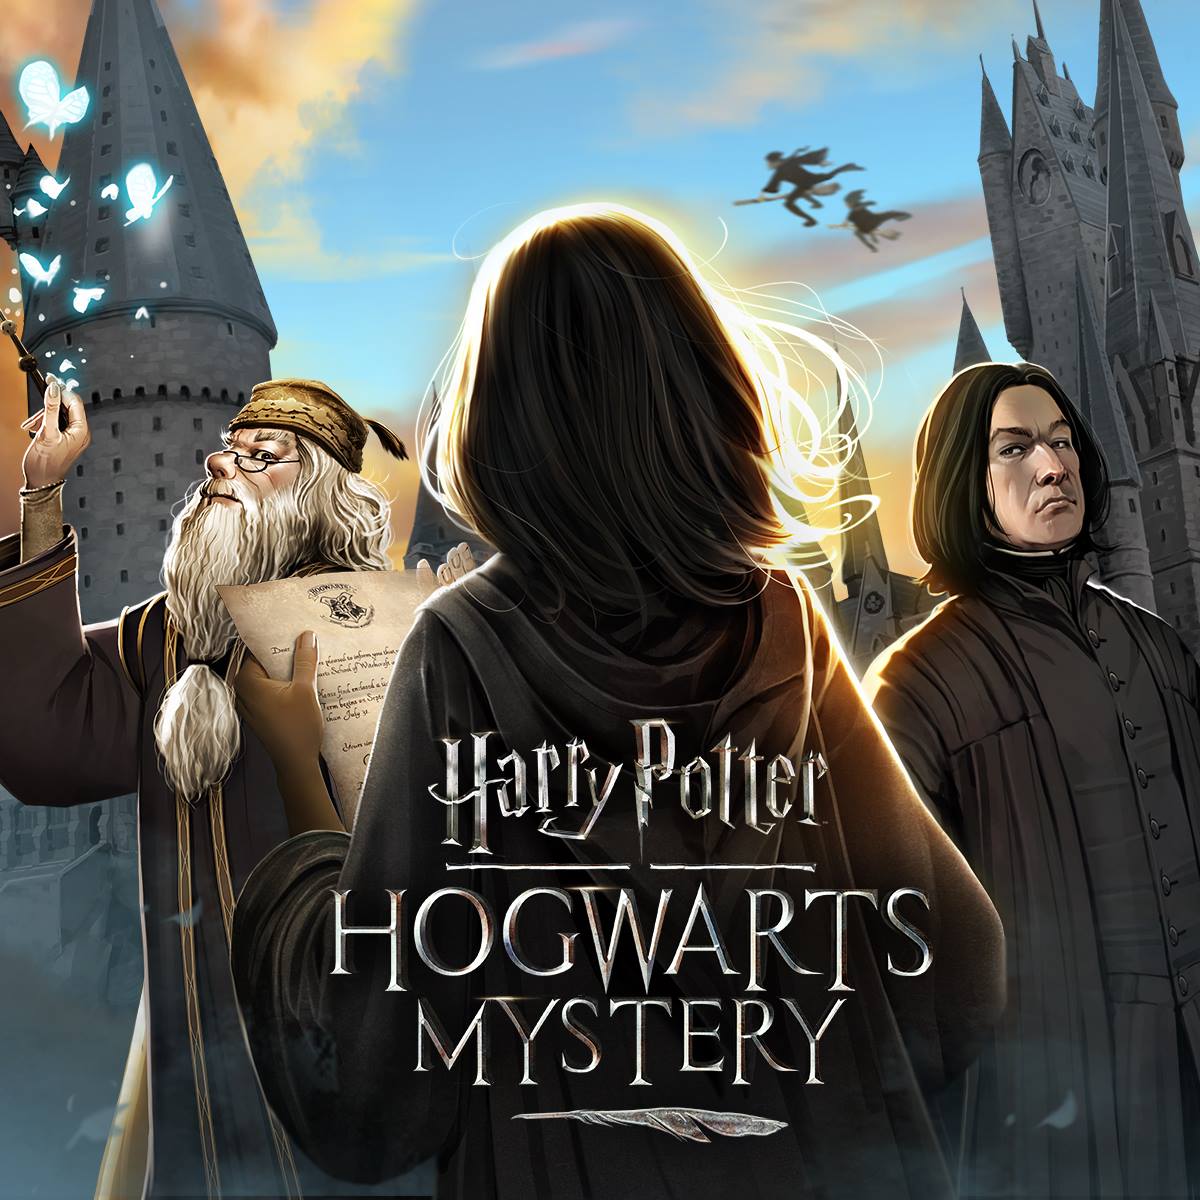 watch-the-new-trailer-for-harry-potter-hogwarts-mystery